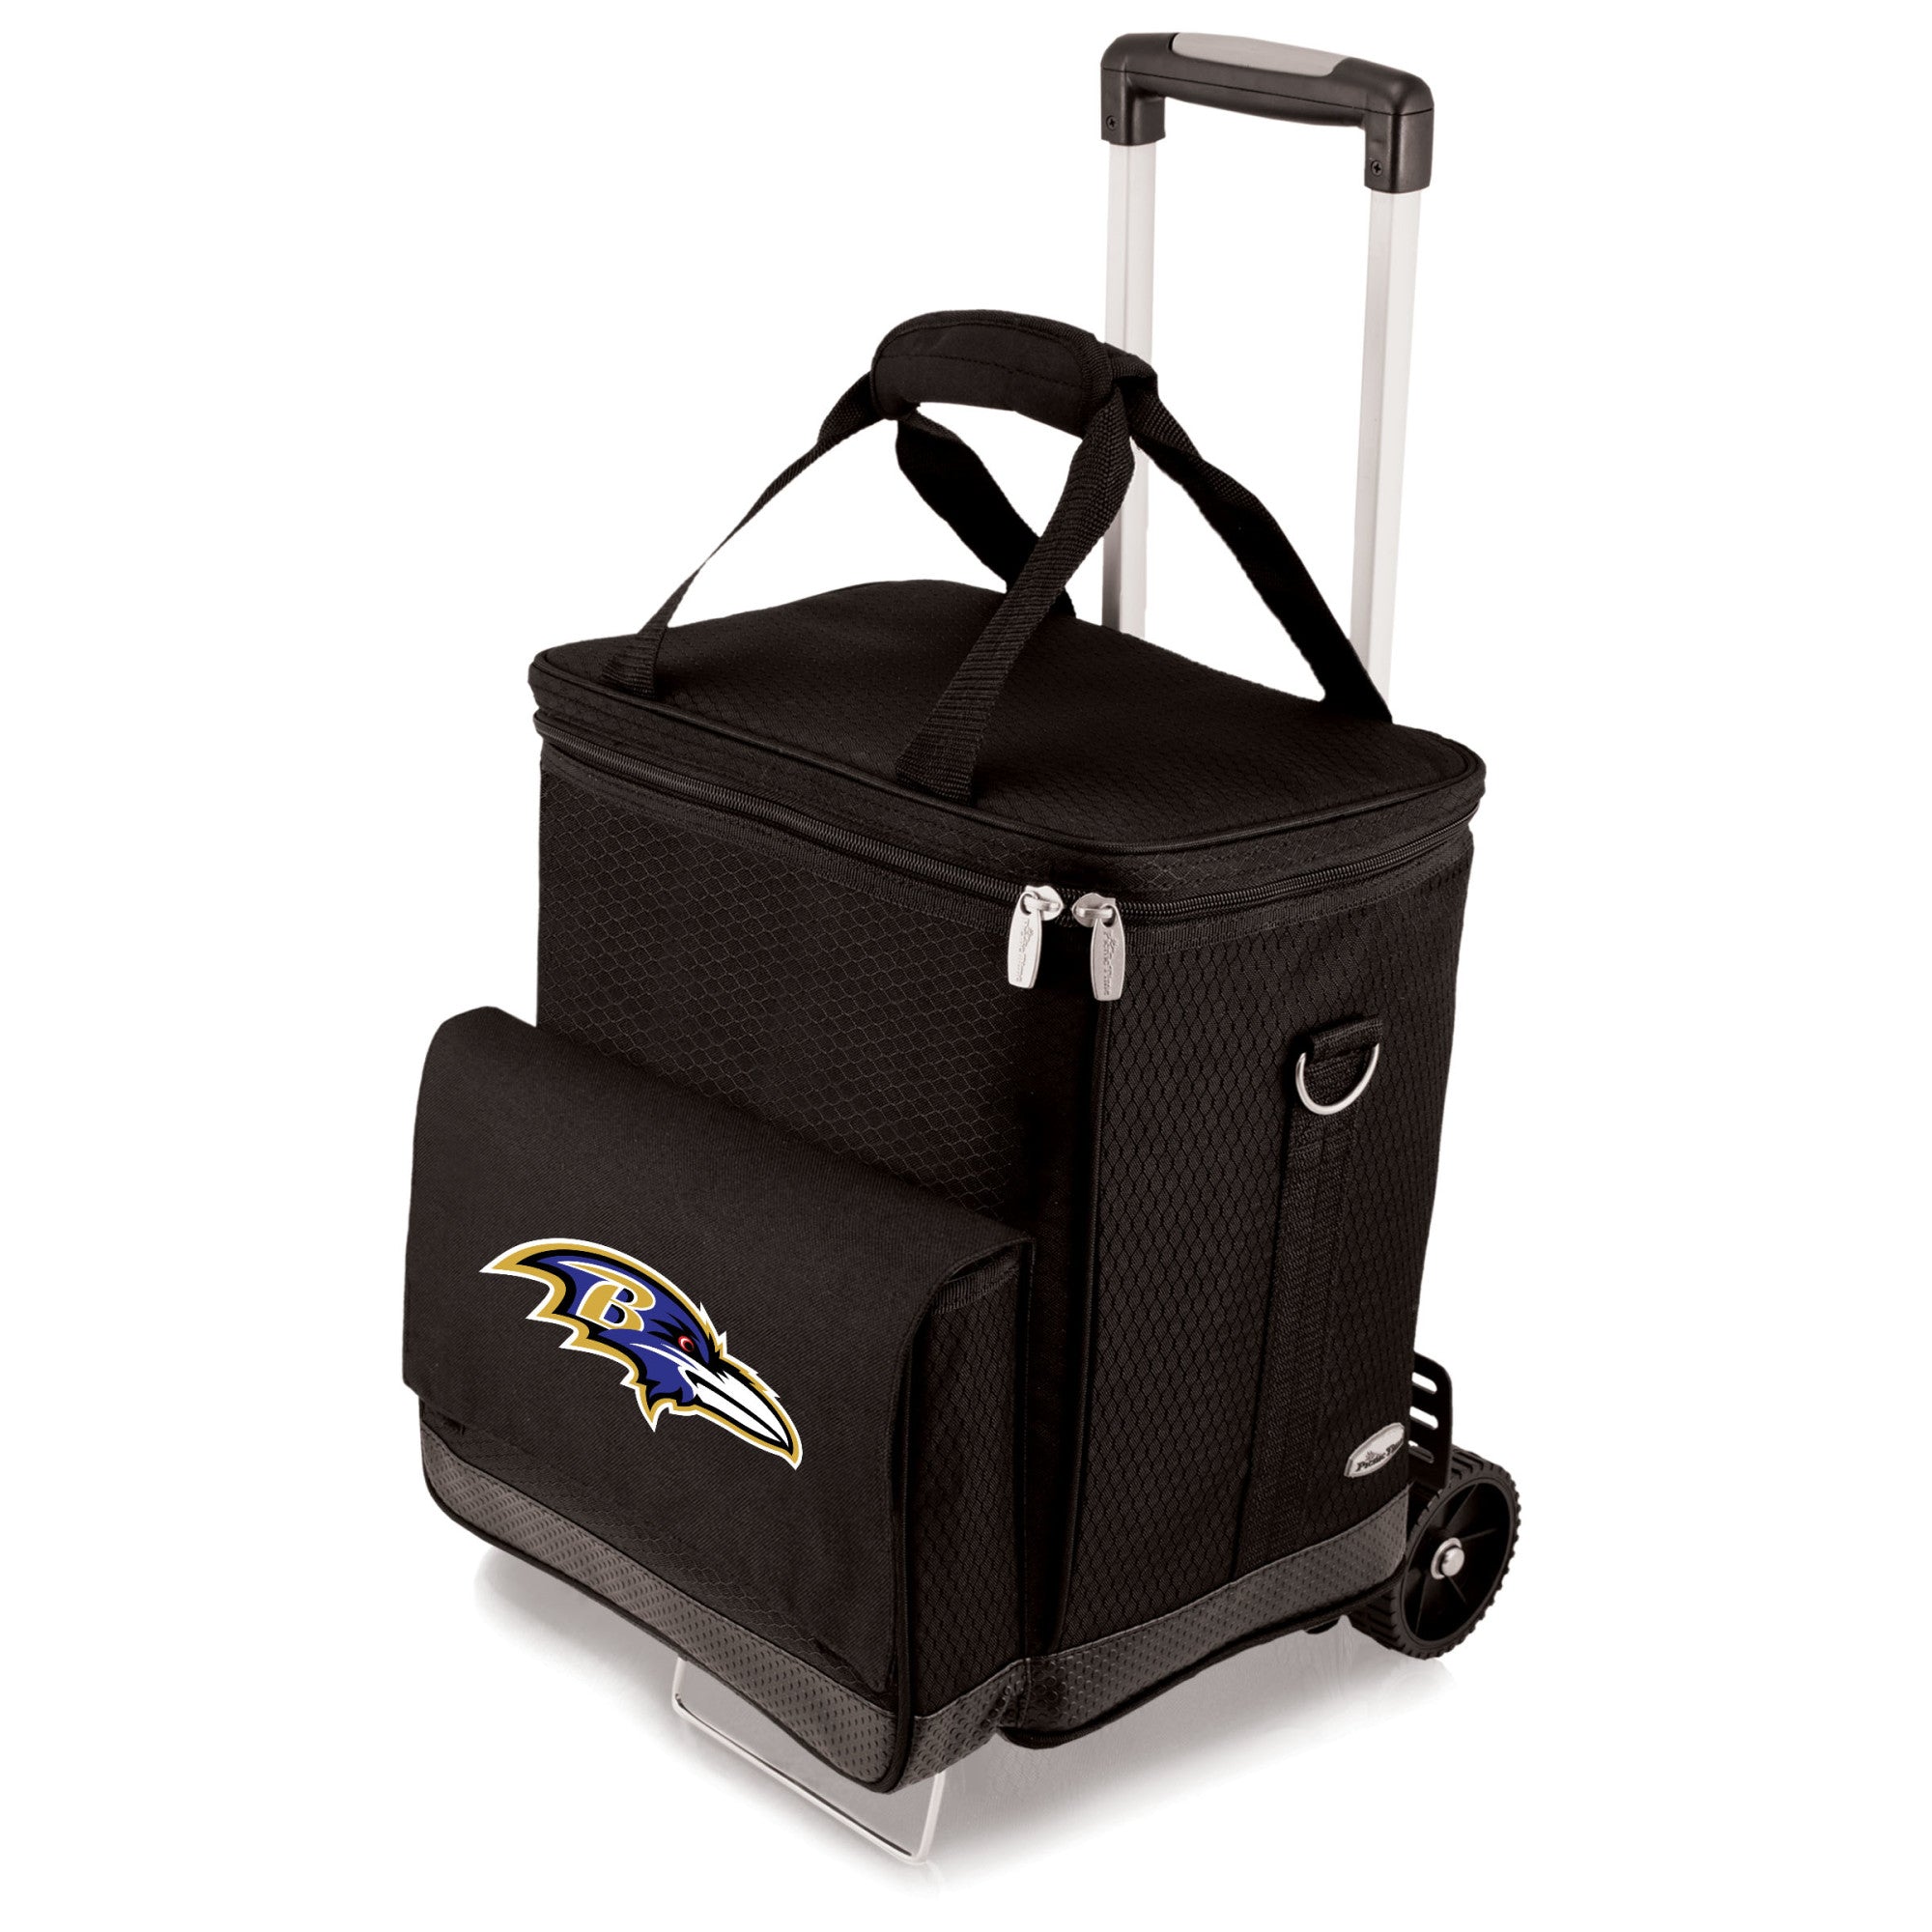 Baltimore Ravens - Cellar 6-Bottle Wine Carrier & Cooler Tote with Trolley, (Black with Gray Accents)